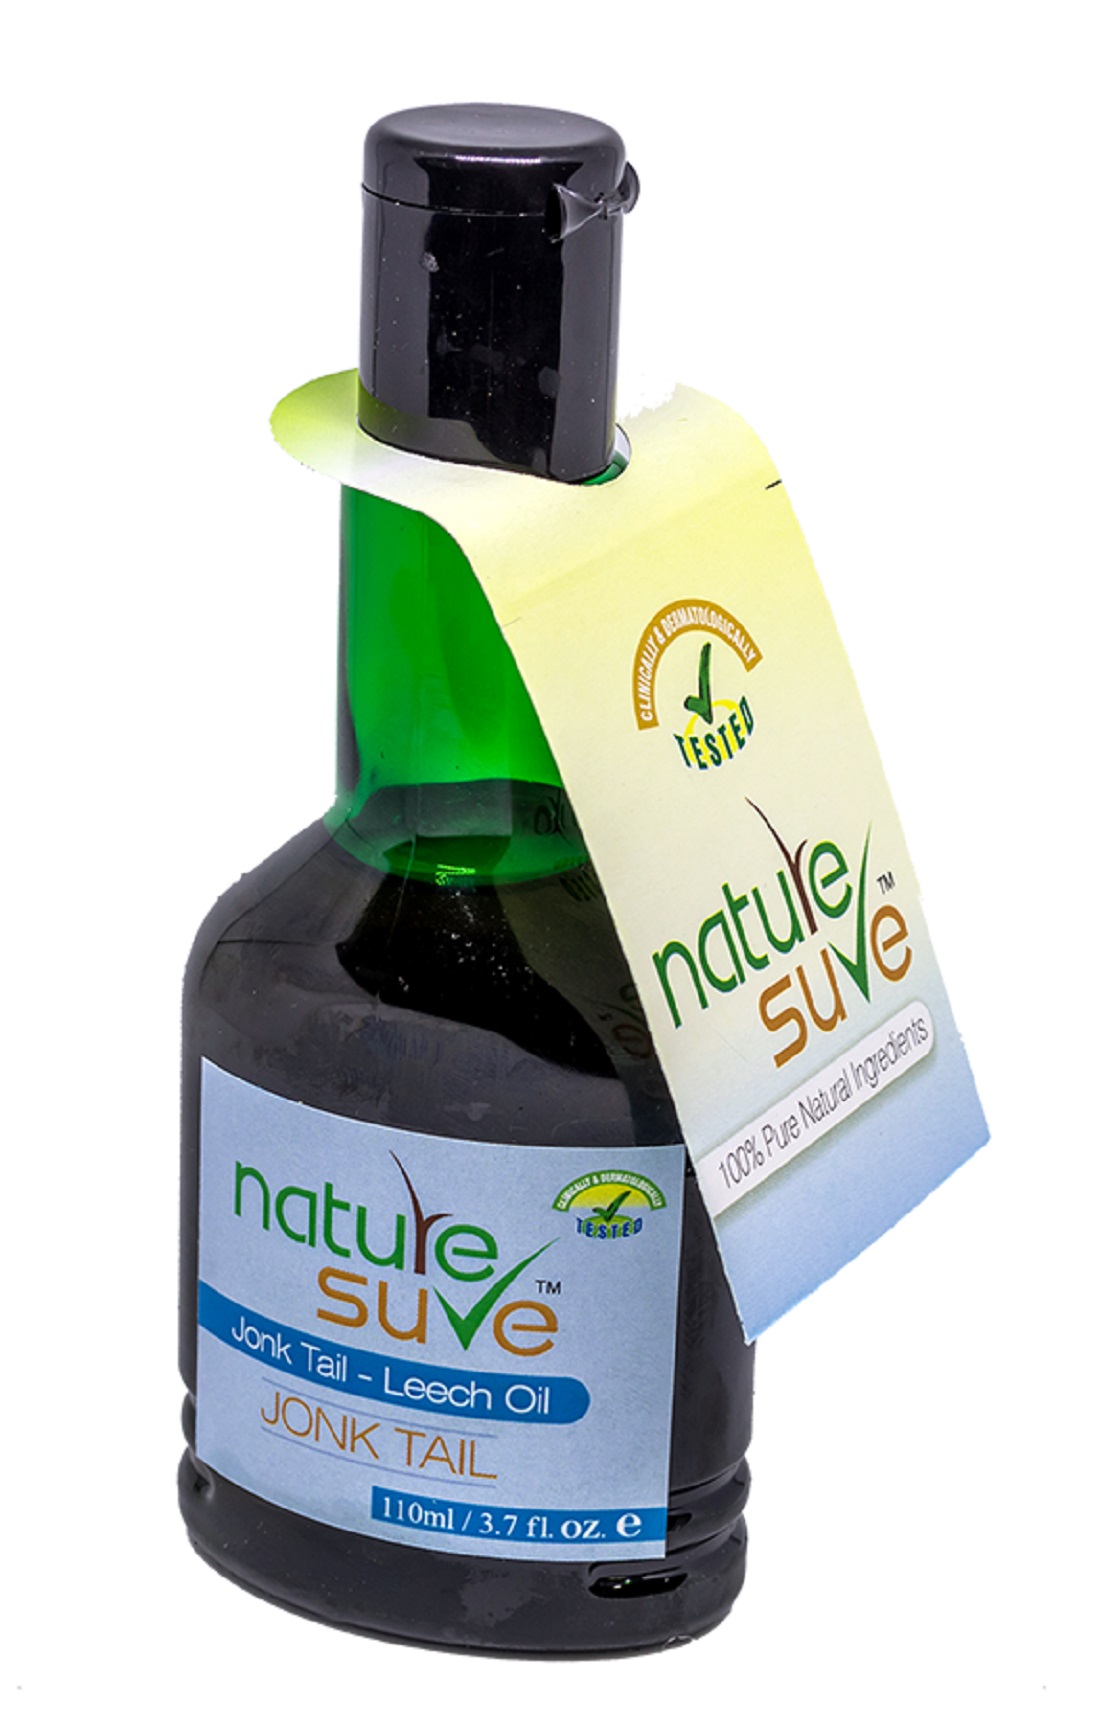 Buy Nature Sure Jonk Tel (Leech Oil) - Purity and Quality Assured ...